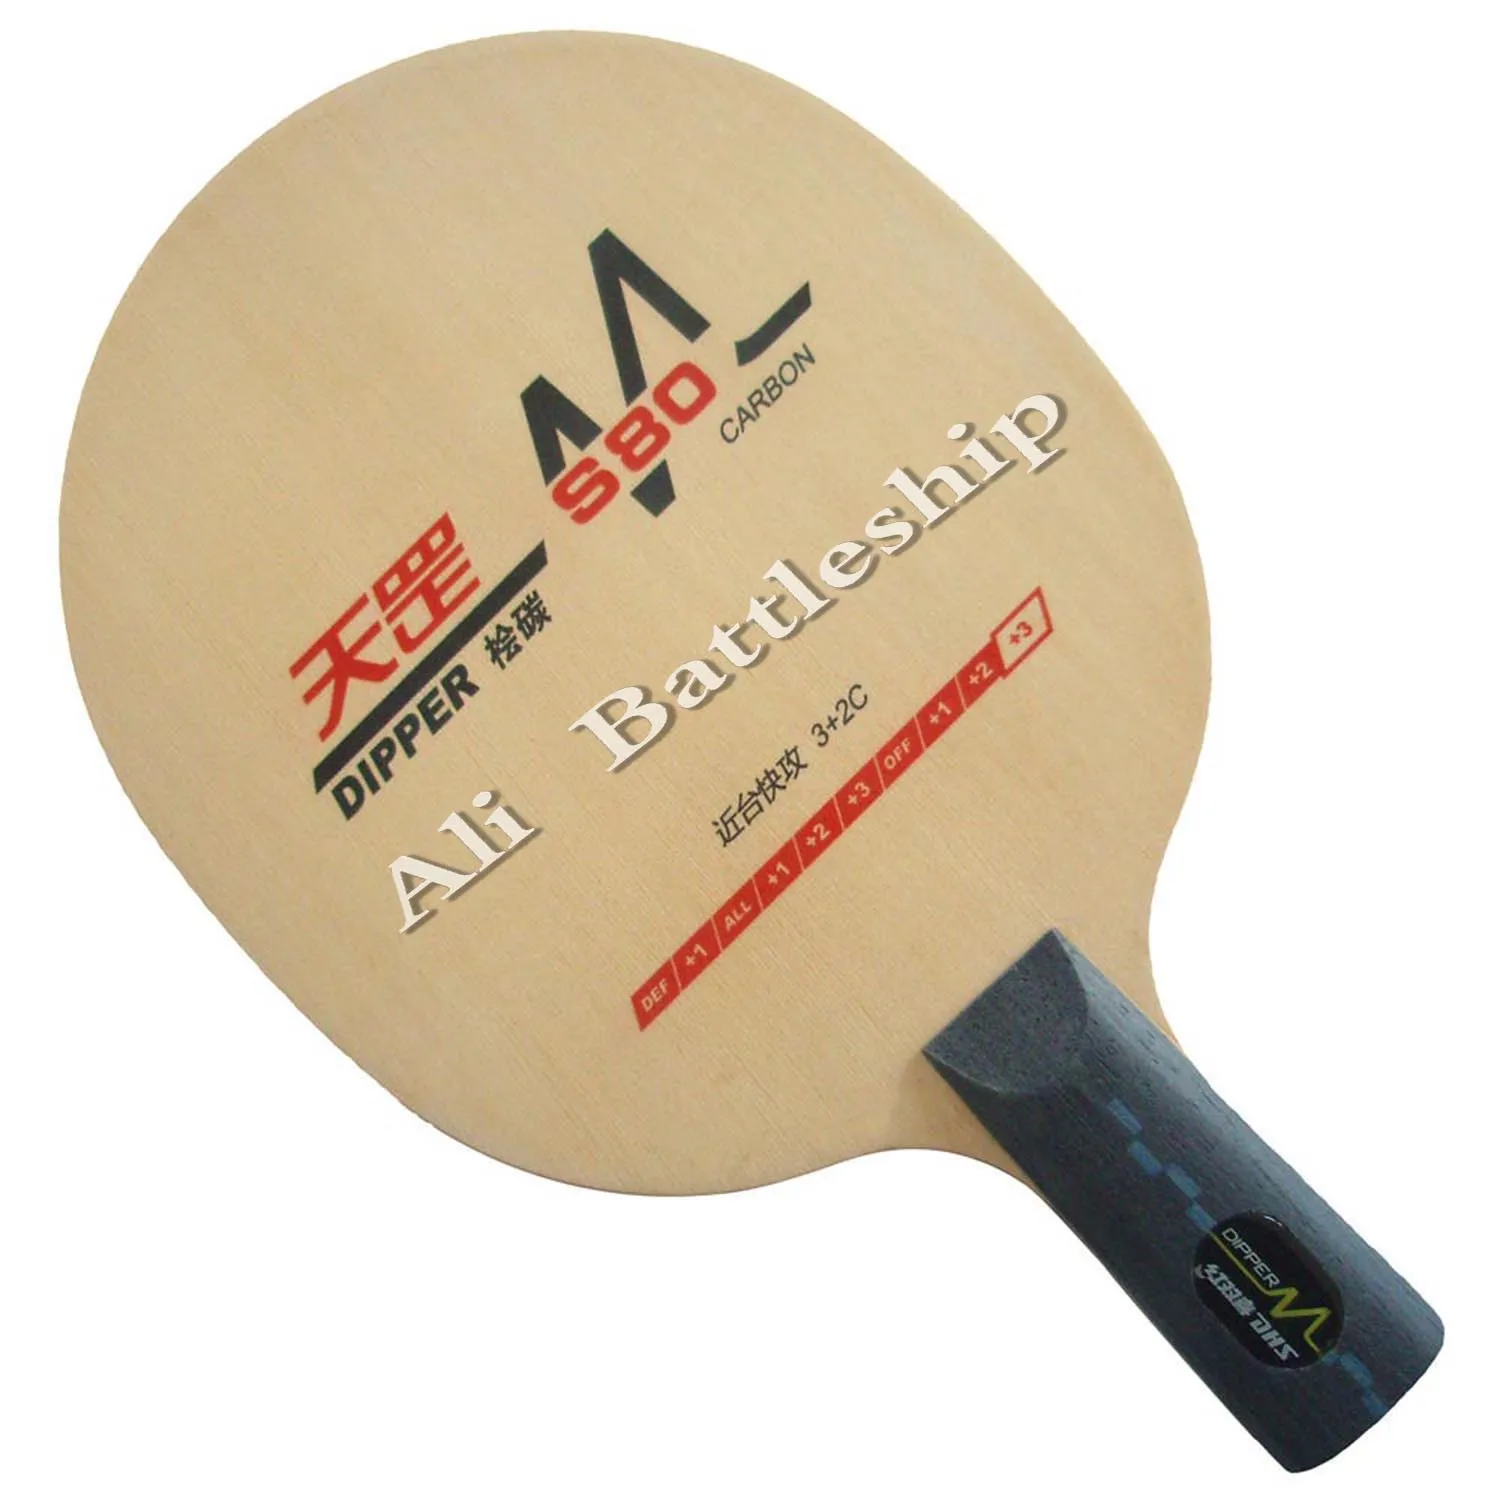 DHS DIPPER DM.S80 OFF+++ 3+2C Table Tennis Ping Pong Blade NEW